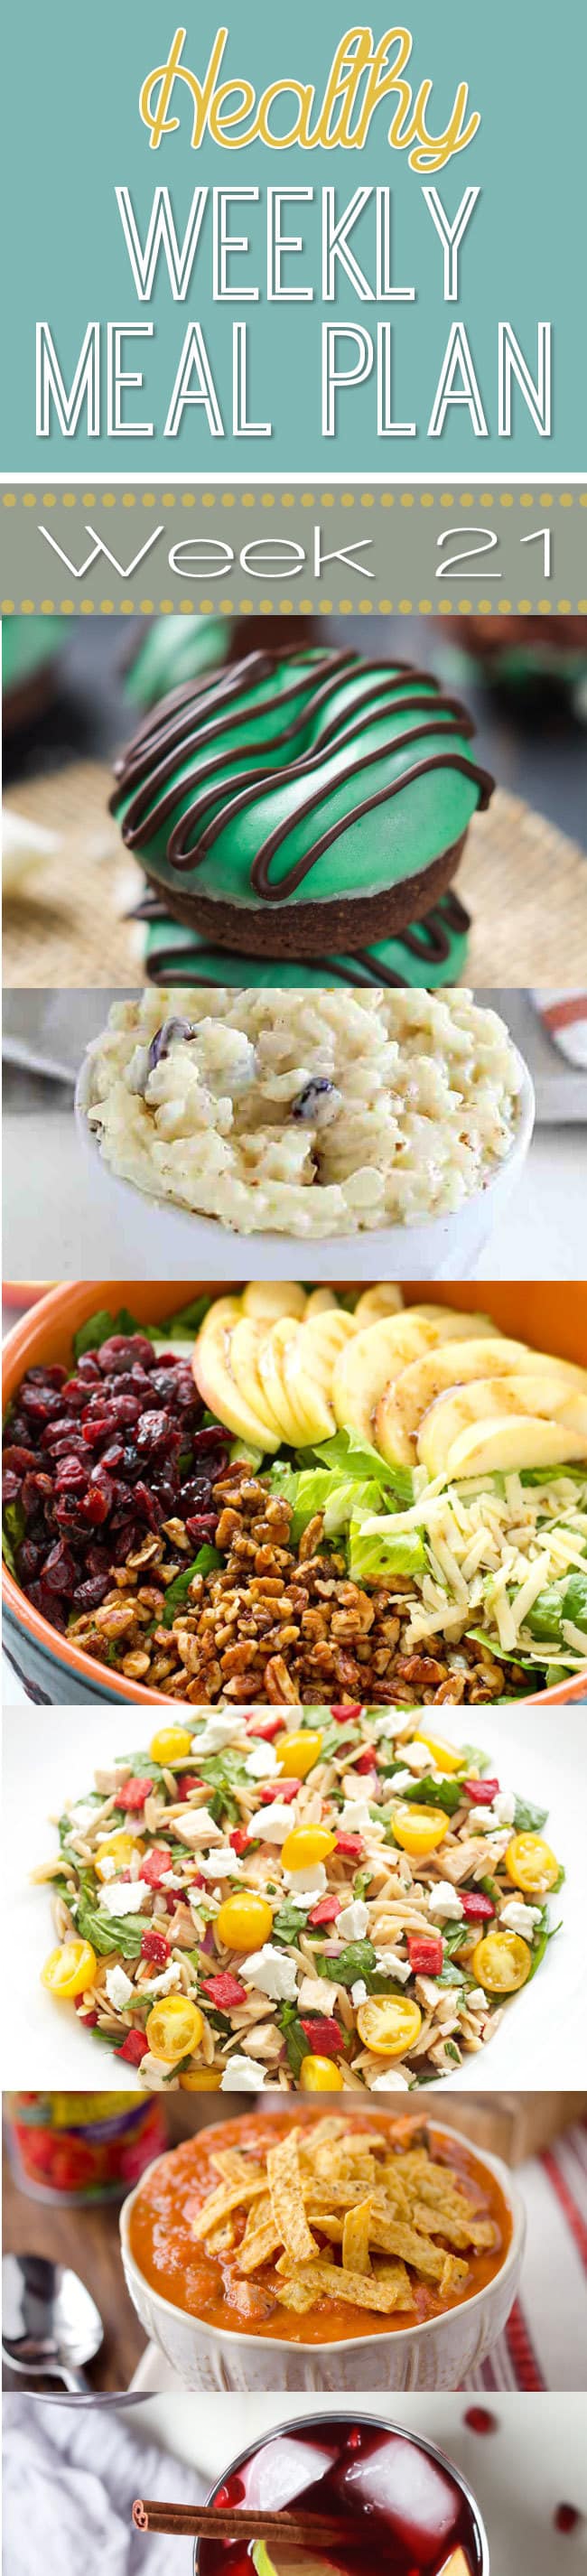 Are you ready for another Healthy Weekly Meal Plan? Week #21 has some of the yummiest comfort food dinners EVER. Plus an easy lunch, snack and dessert recipe too! So many great recipes all together so you can plan your week's meals with ease!